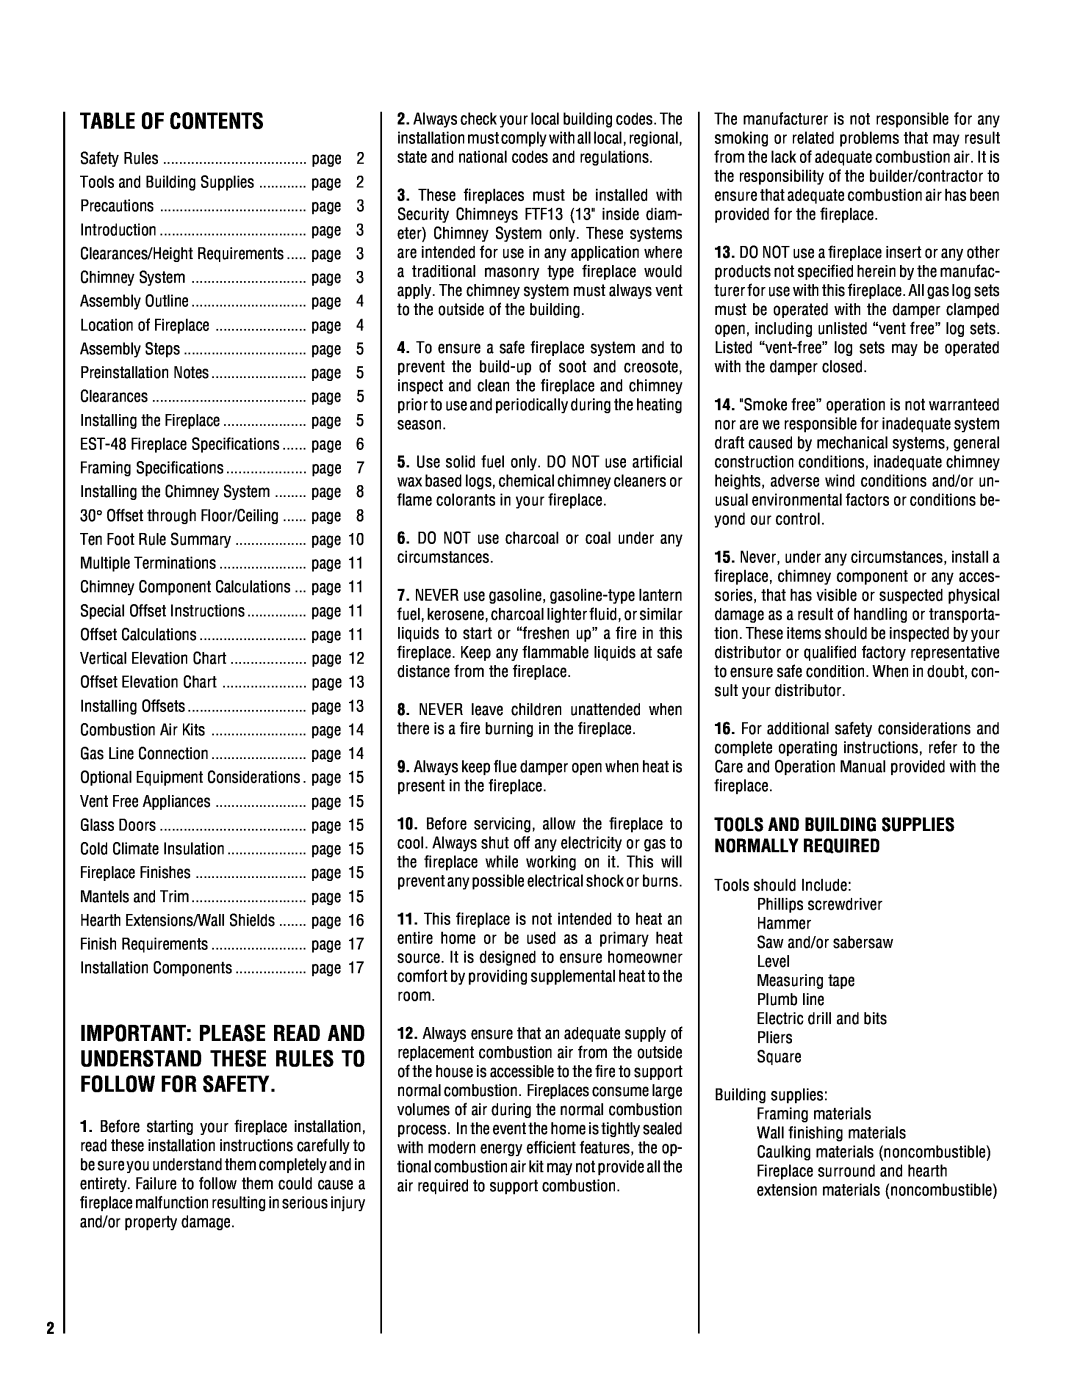 Lucent Technologies EST-48 installation instructions Table Of Contents, Tools And Building Supplies Normally Required 